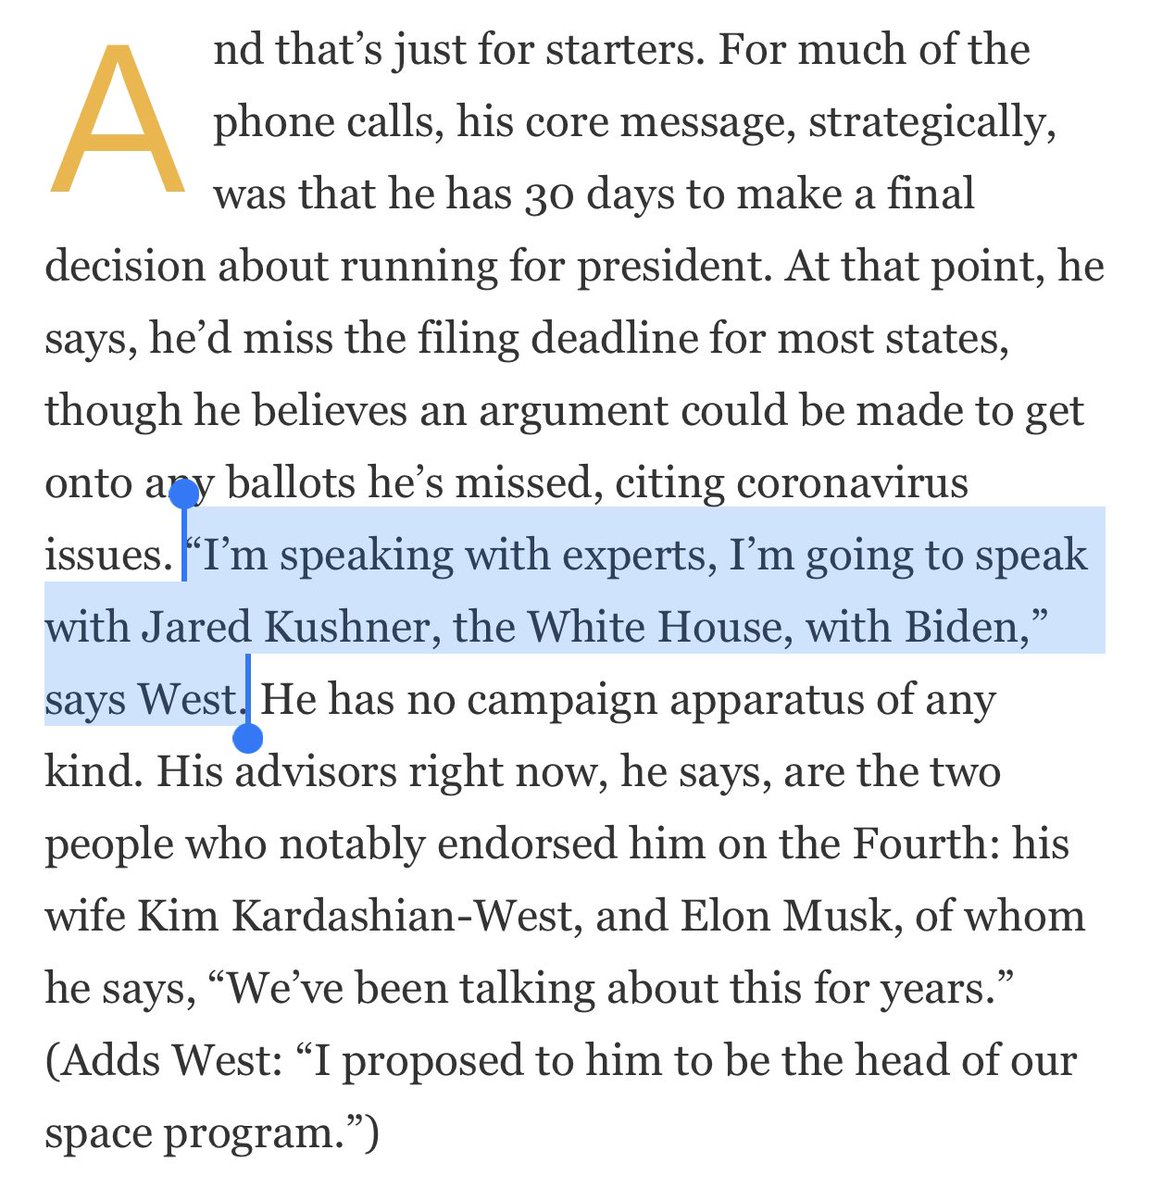 Kanye West is aware he hasn’t filed any of the necessary paperwork to run for president; he intends to chat with his would-be competitors about this.He will also week guidance from Kim and Elon.